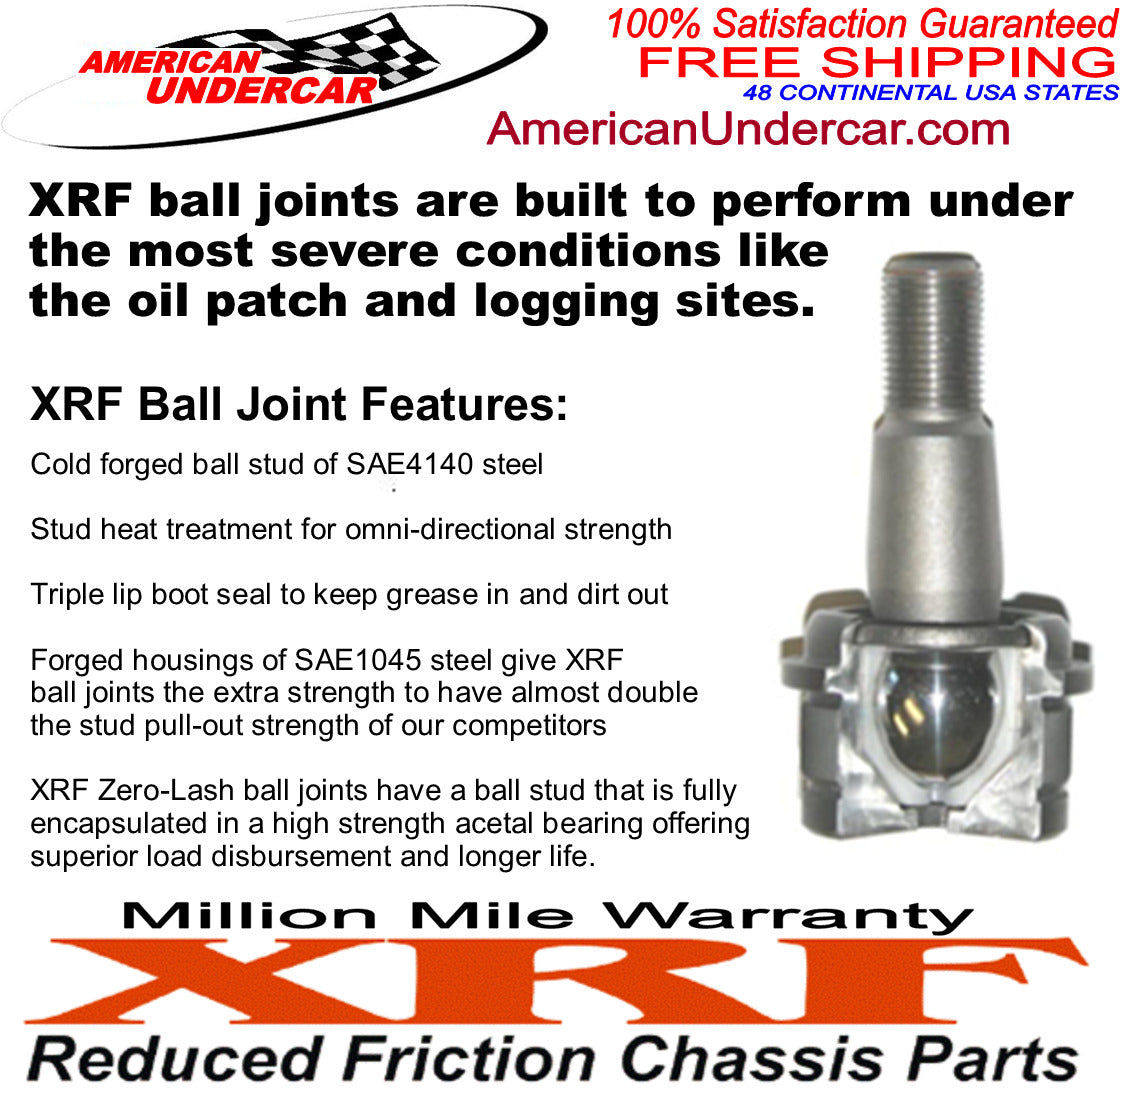 XRF Ford F250 Super Duty Ball Joint Steering and Suspension Kit 2005 - 2010 4x4